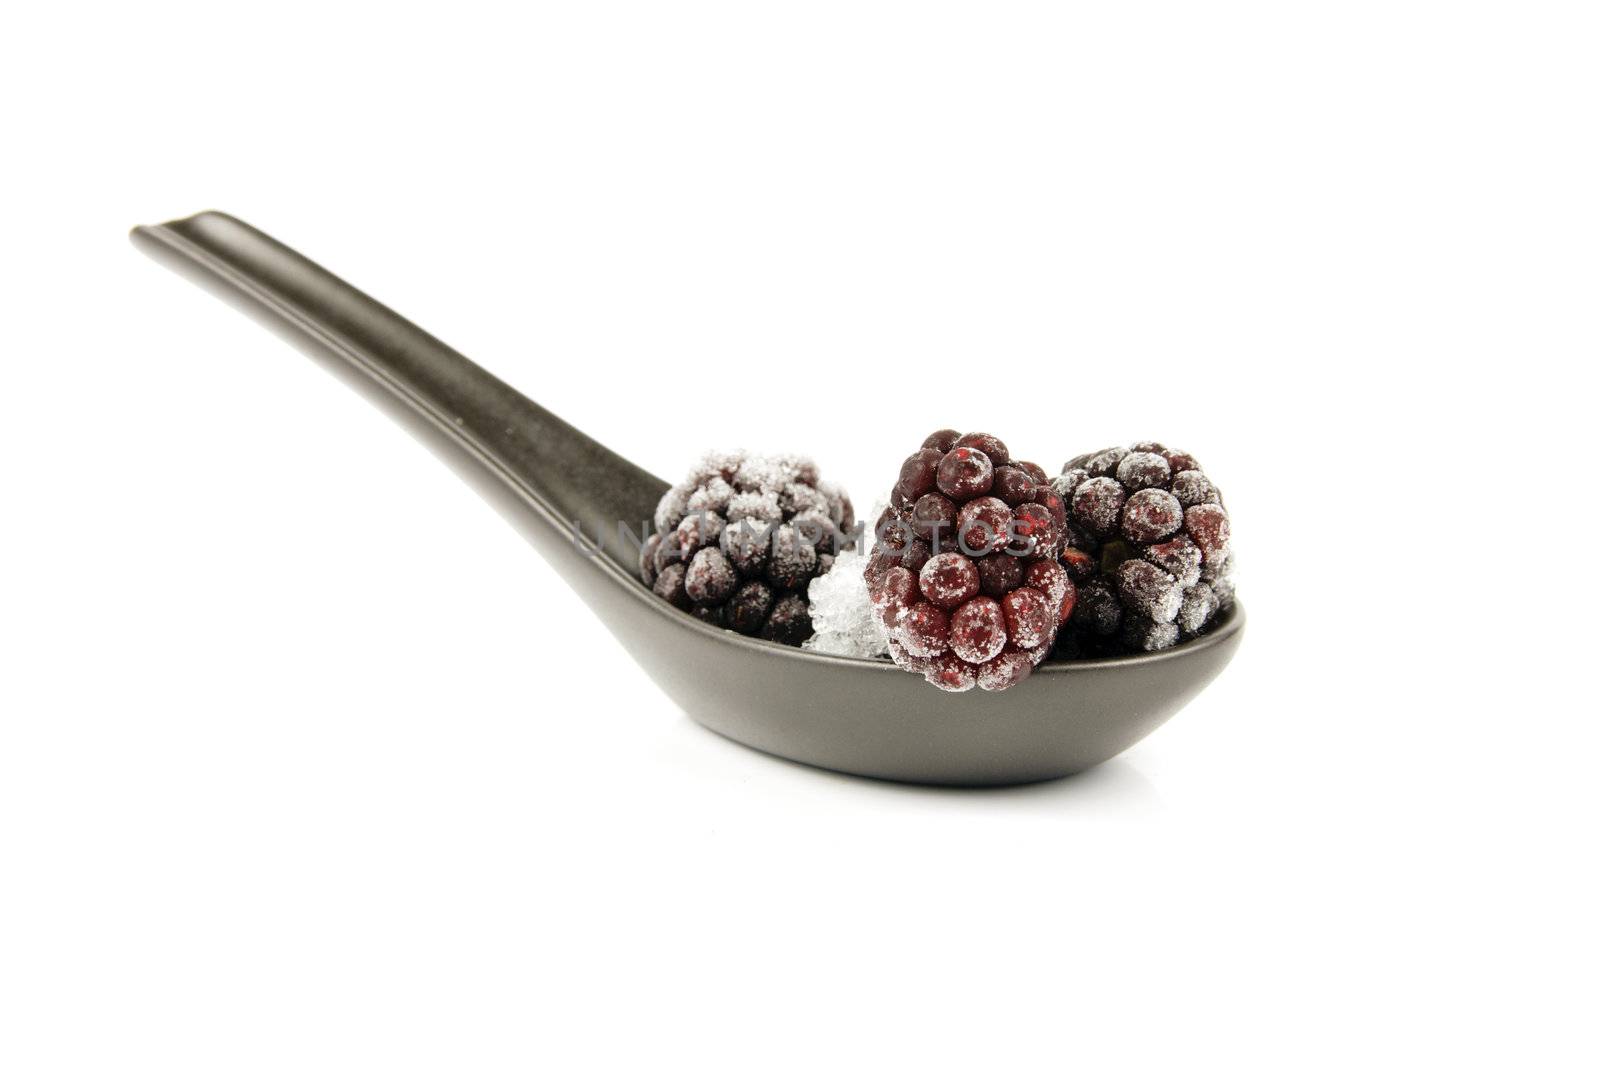 Ripe frozen blackberries on a small black spoon with a reflective white background